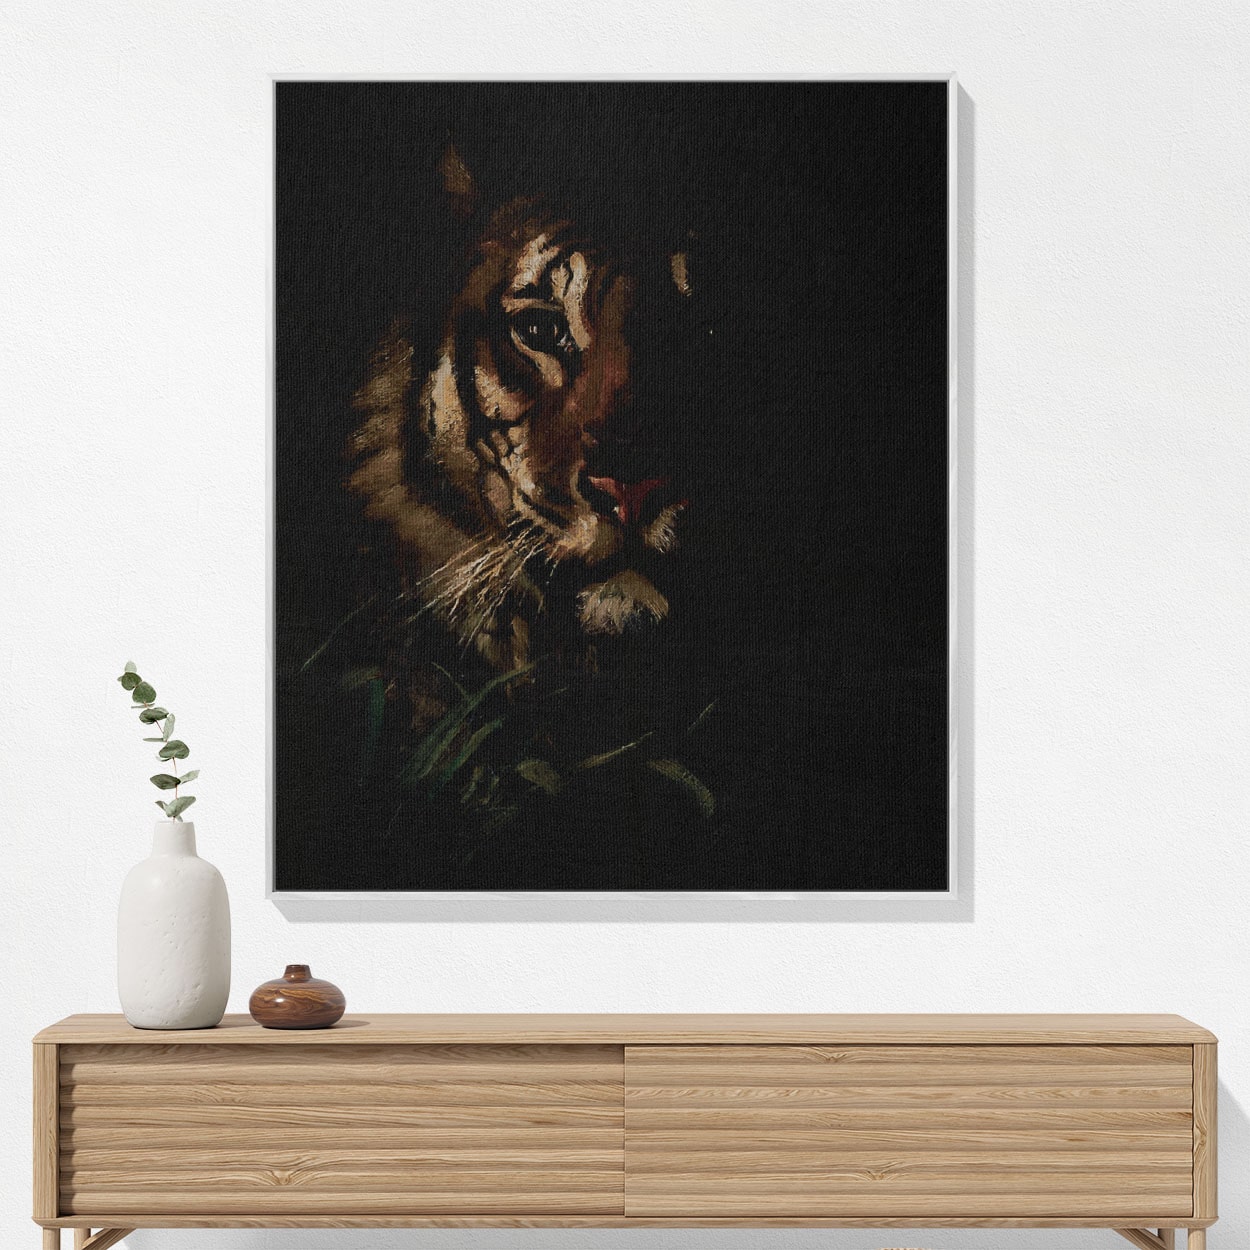 Vintage Animal Woven Blanket Hanging on a Wall as Framed Wall Art